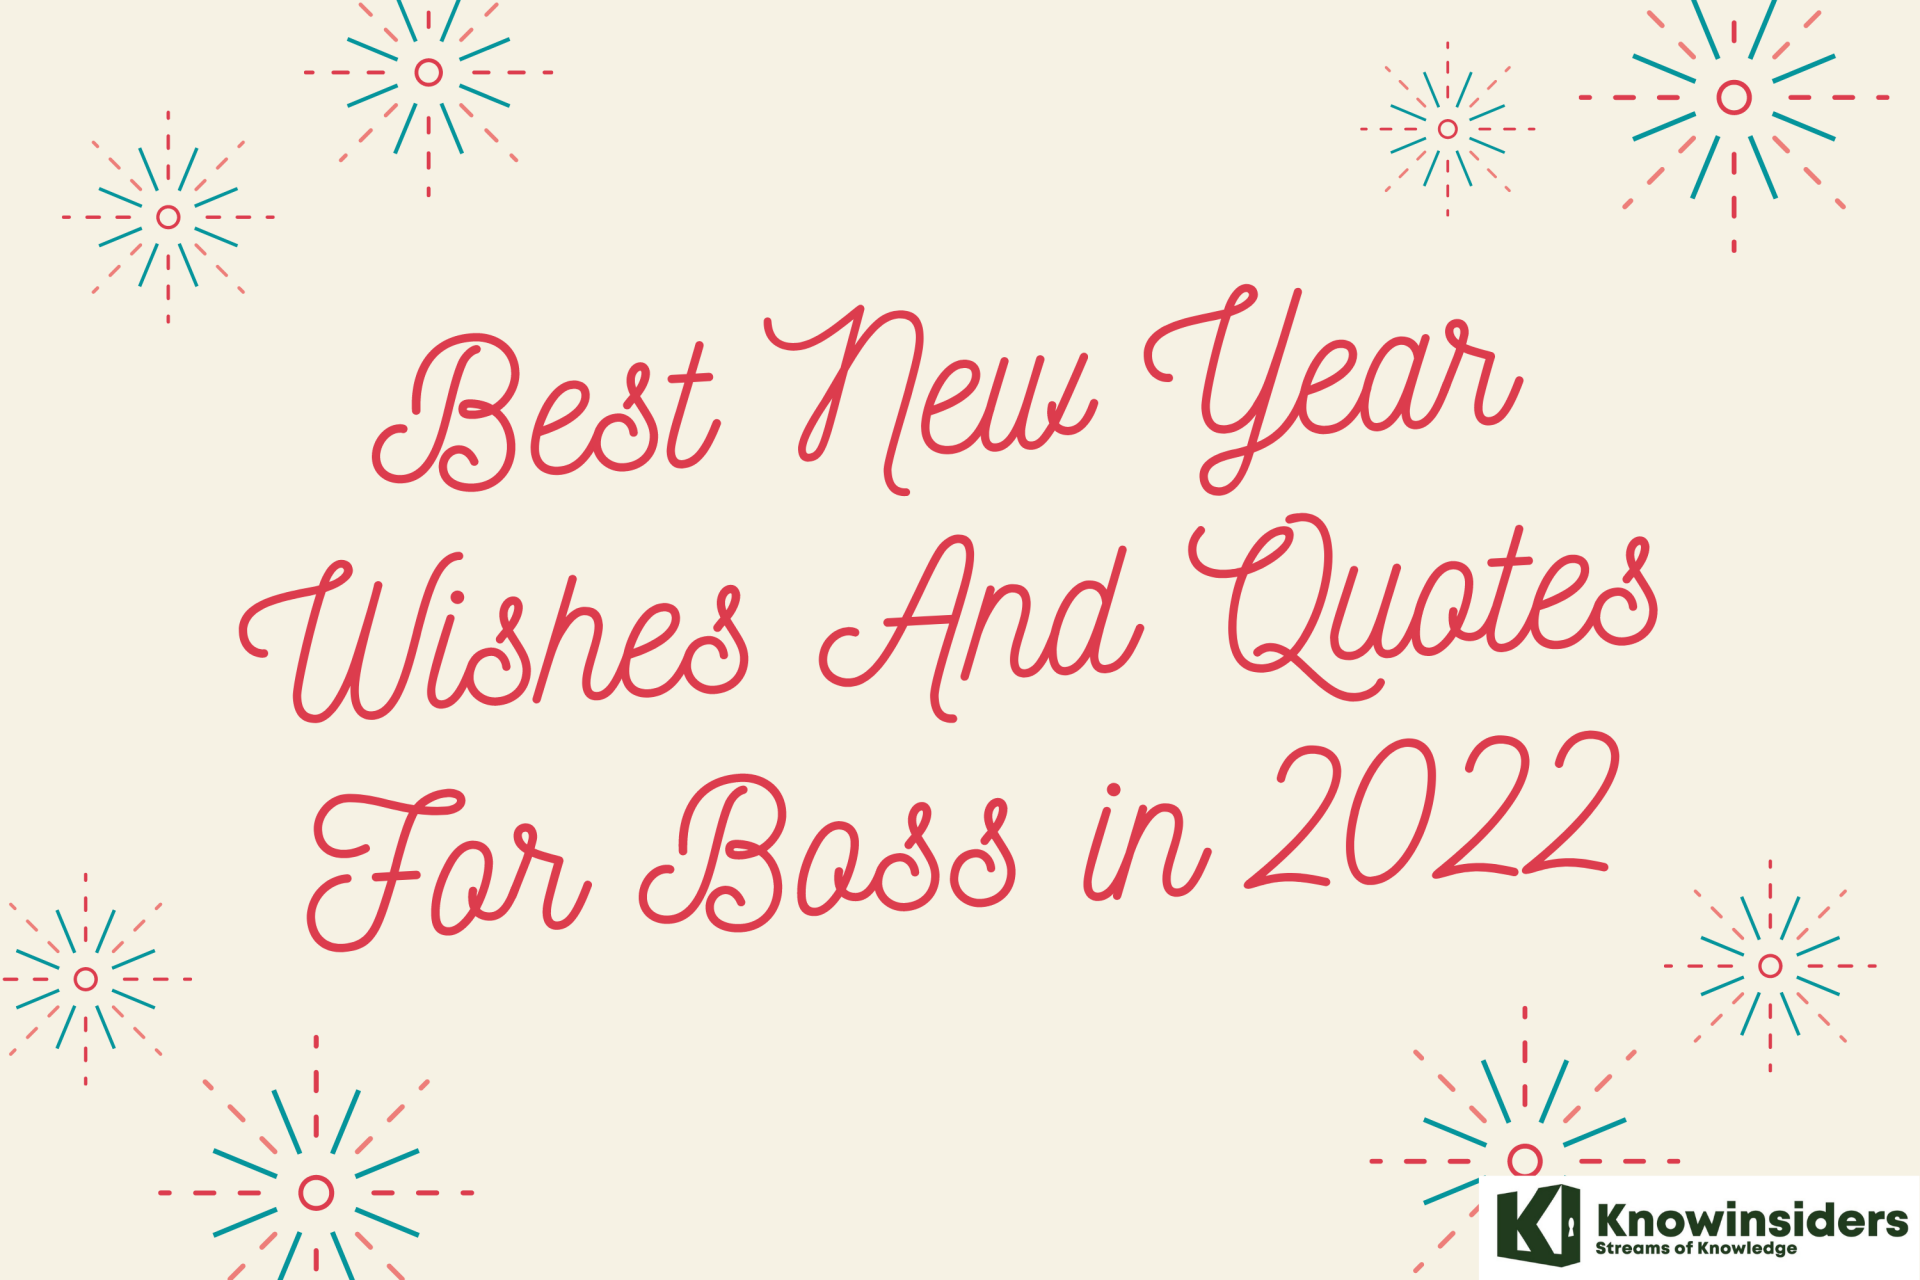 50 Best New Year Wishes And Quotes For Boss